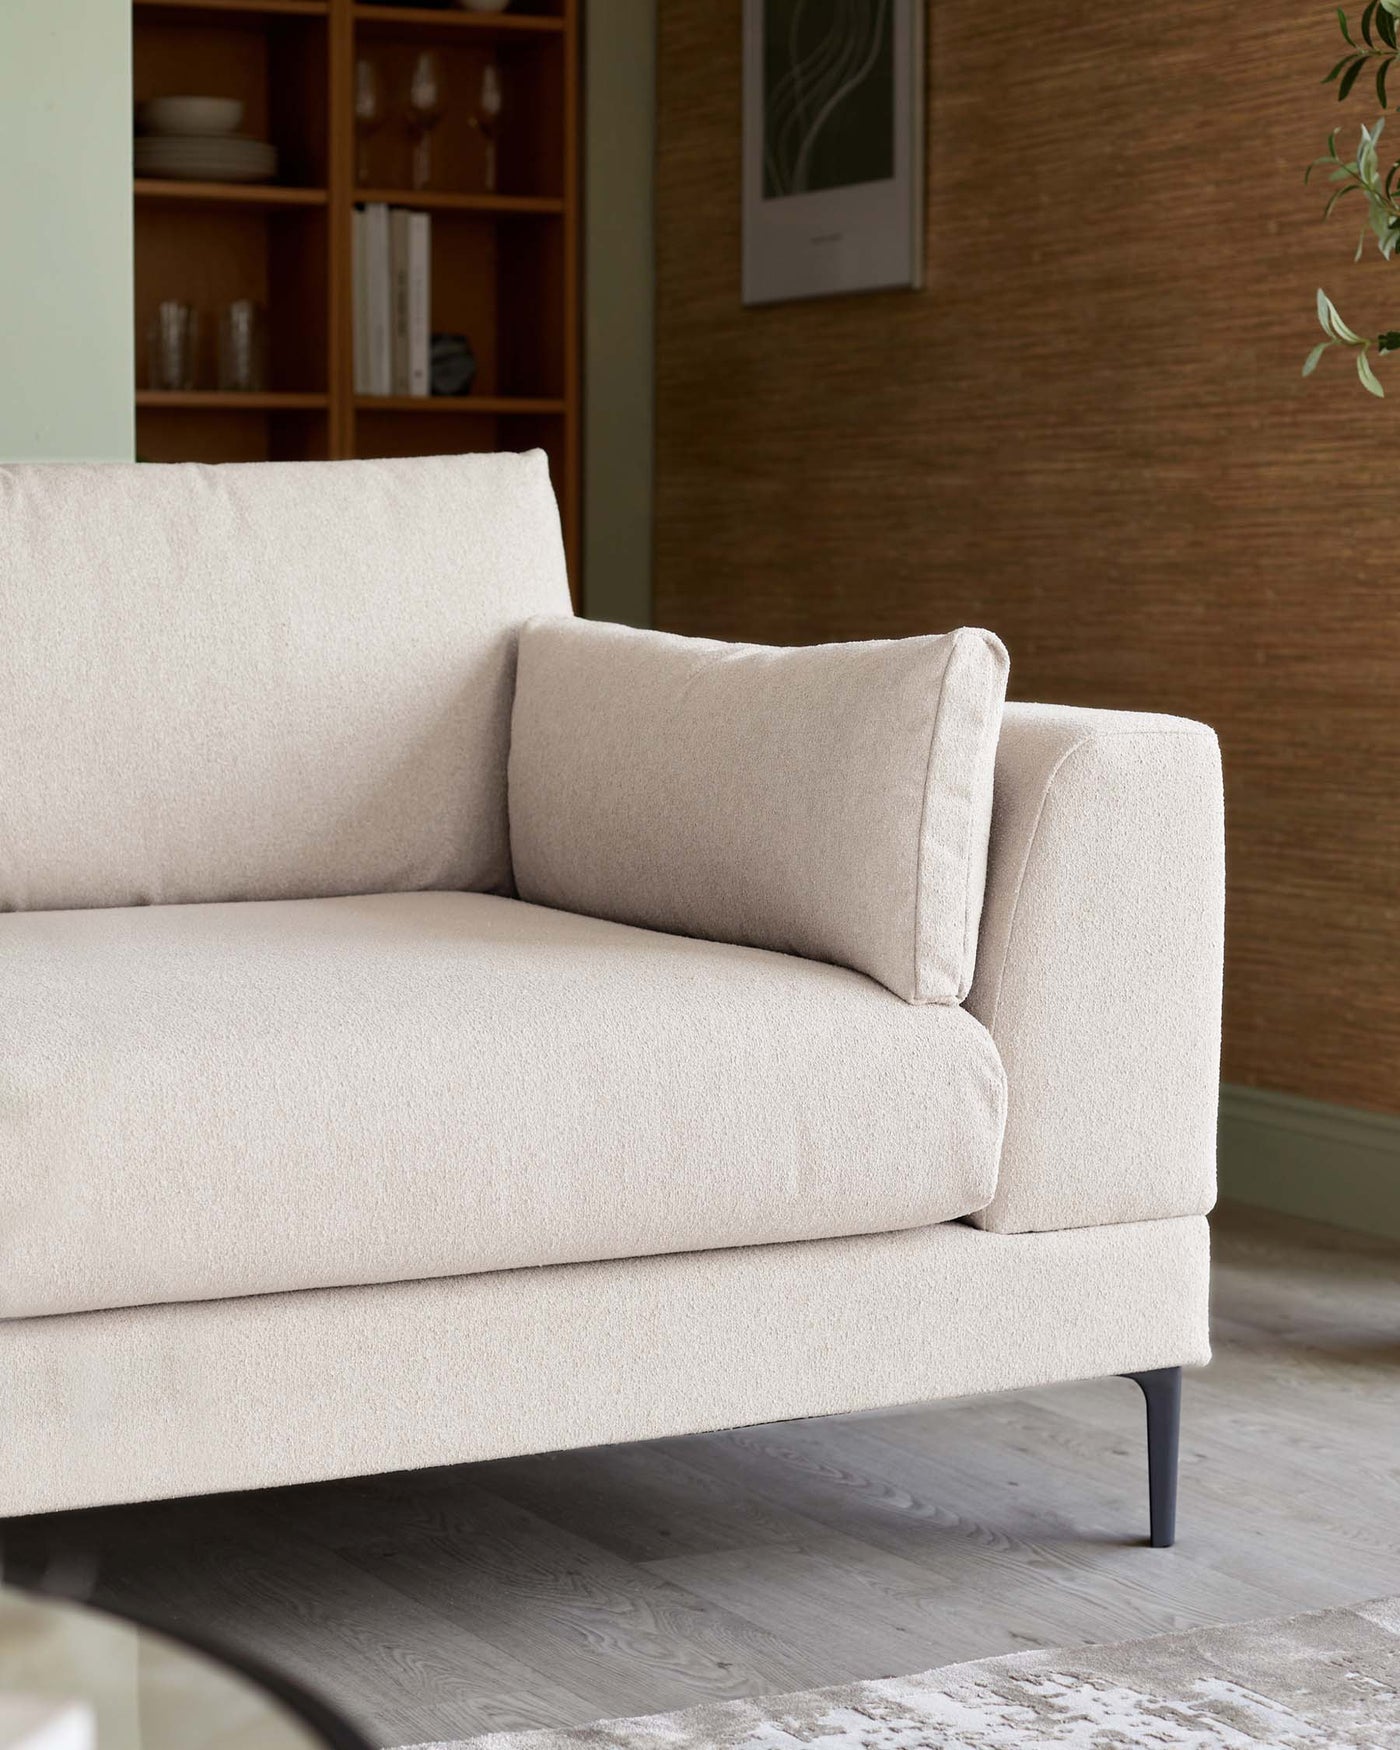 A modern beige fabric sofa with a clean, streamlined design, featuring a rectangular silhouette with a cushioned backrest and a single seat cushion, complemented by one matching side pillow. The sofa has a sleek profile with a minimalistic armrest on the visible side and is raised on slender black metal legs. The background includes a wooden cabinet with glassware and books, and a framed artwork on a textured wall, evoking a contemporary and sophisticated interior setup.